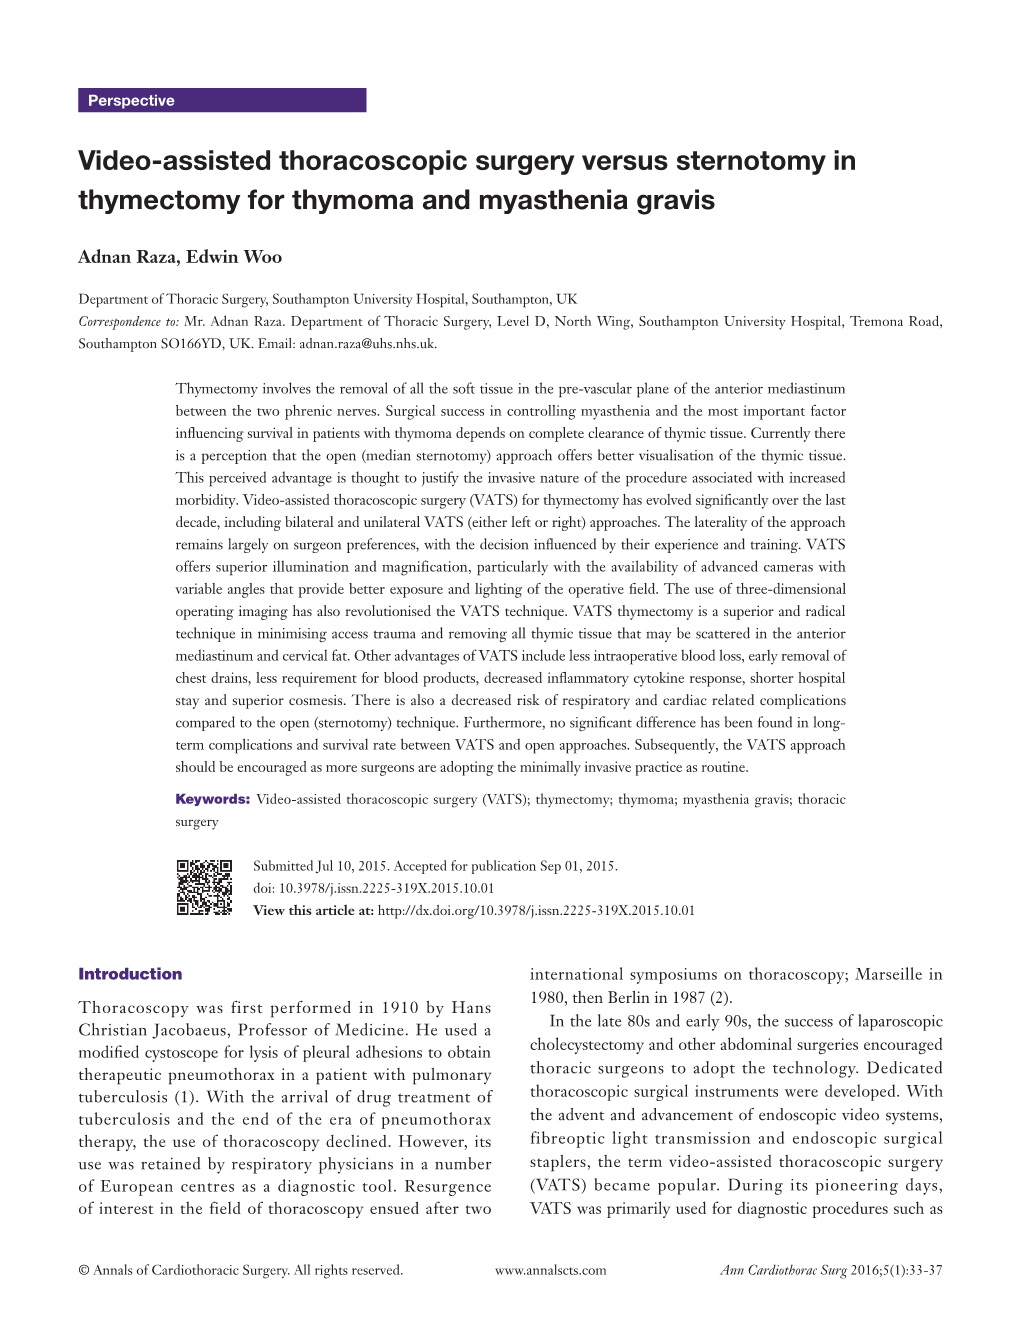 Video-Assisted Thoracoscopic Surgery Versus Sternotomy in Thymectomy for Thymoma and Myasthenia Gravis